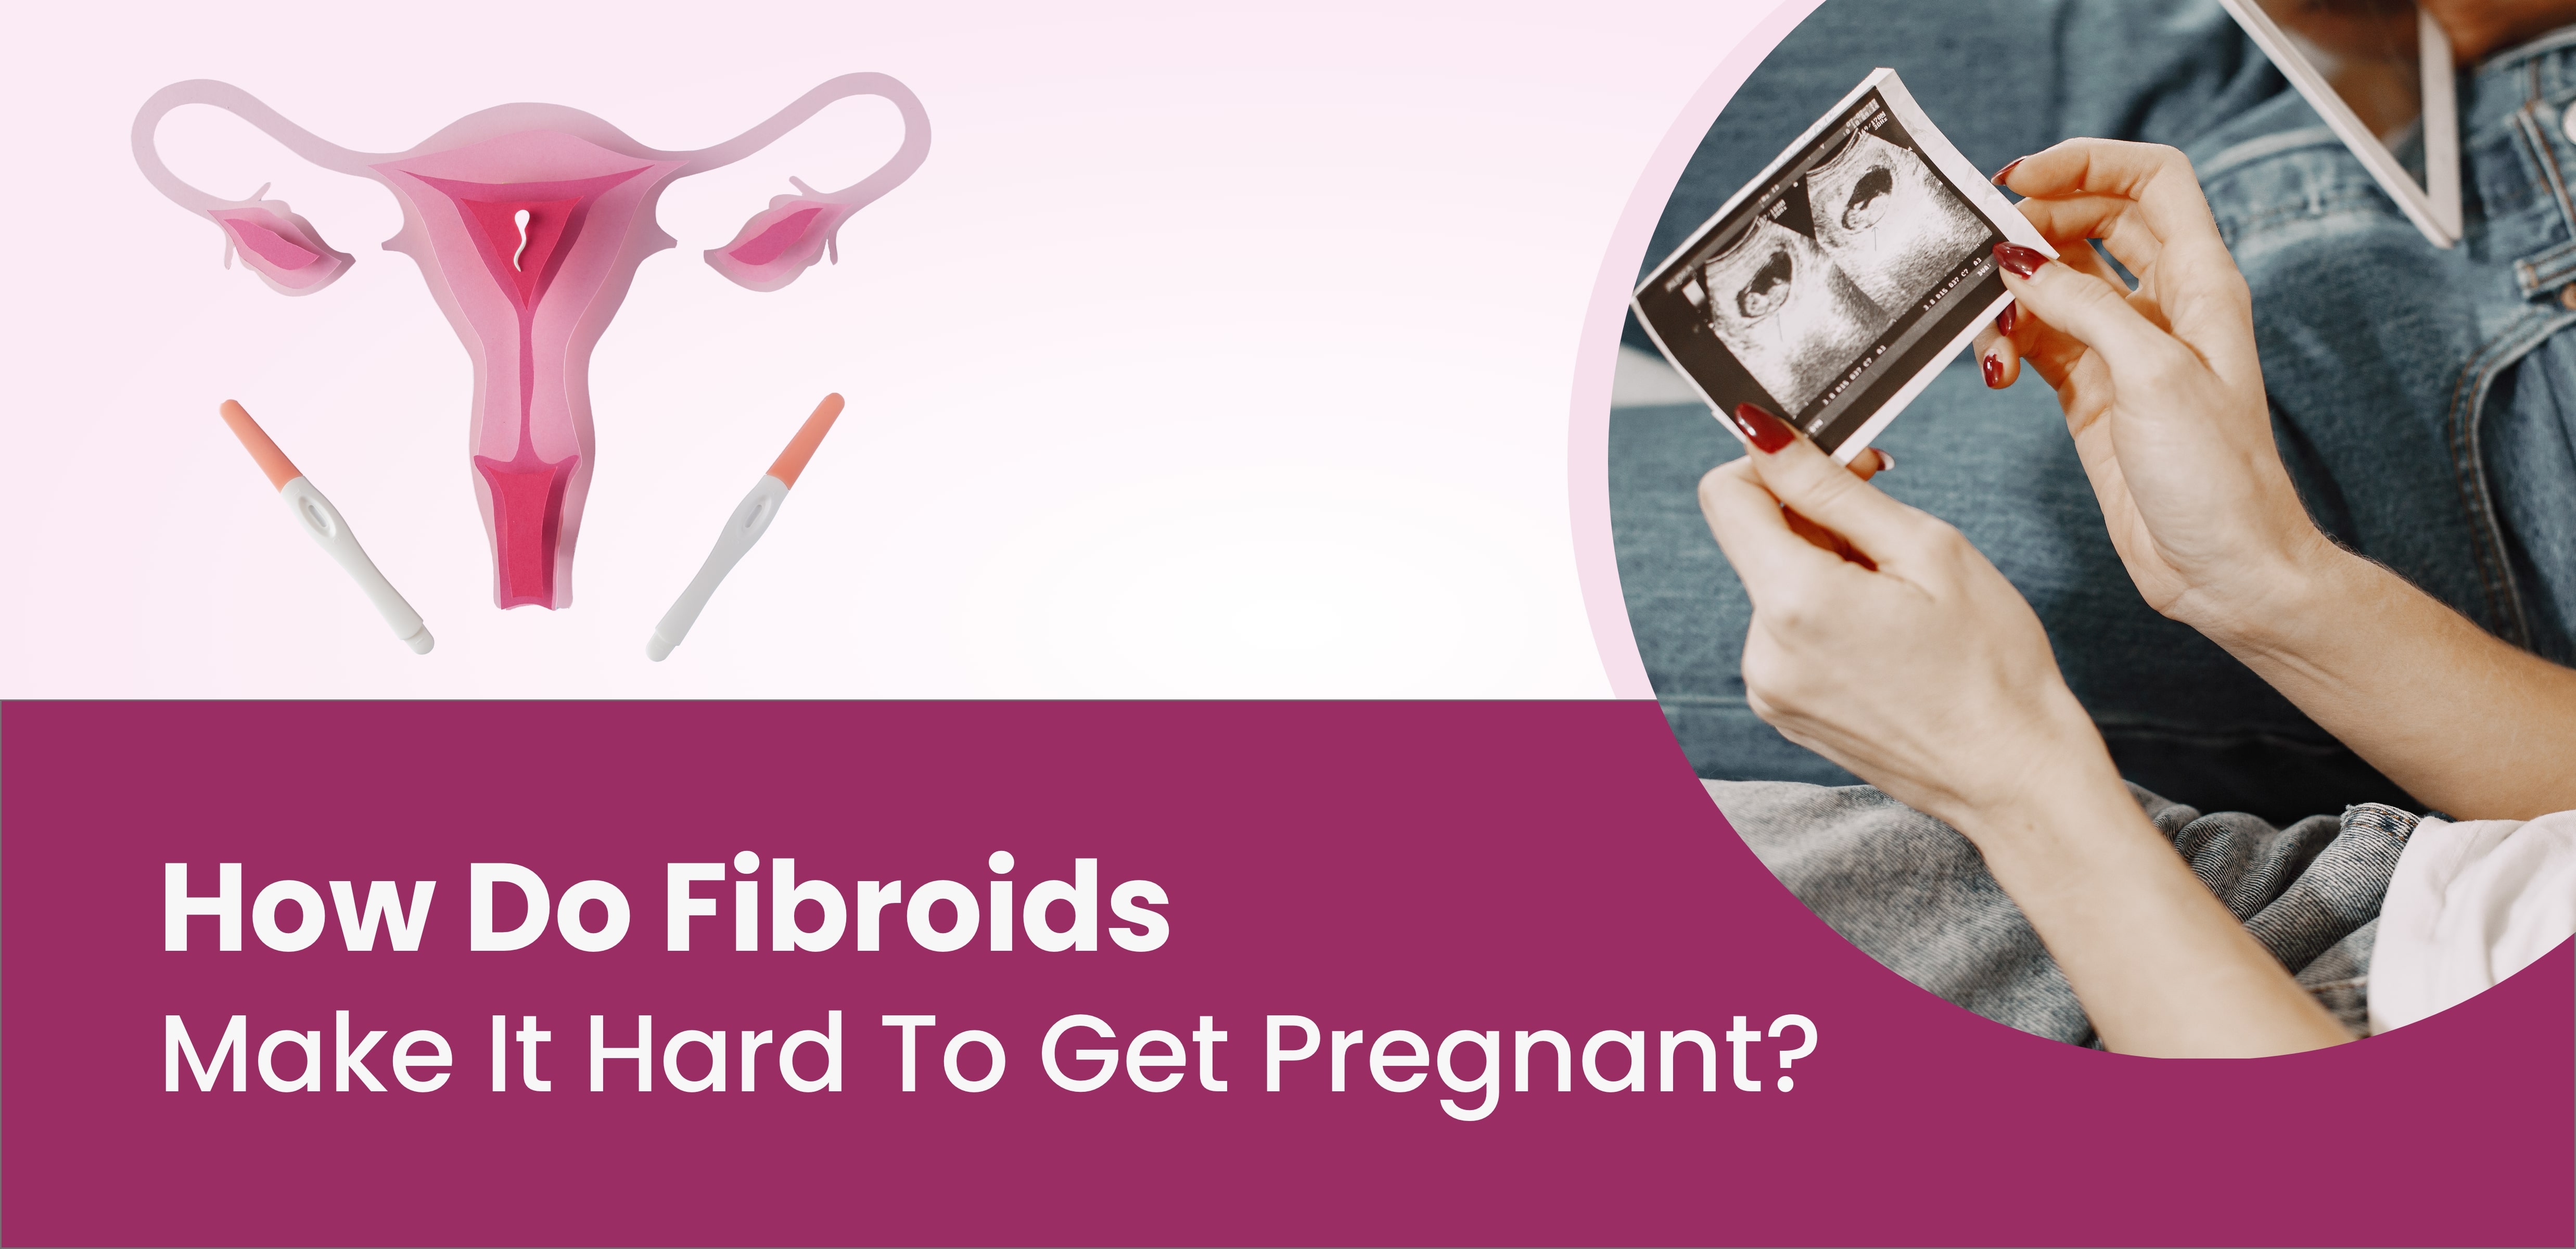 How do fibroids make it hard to get pregnant?